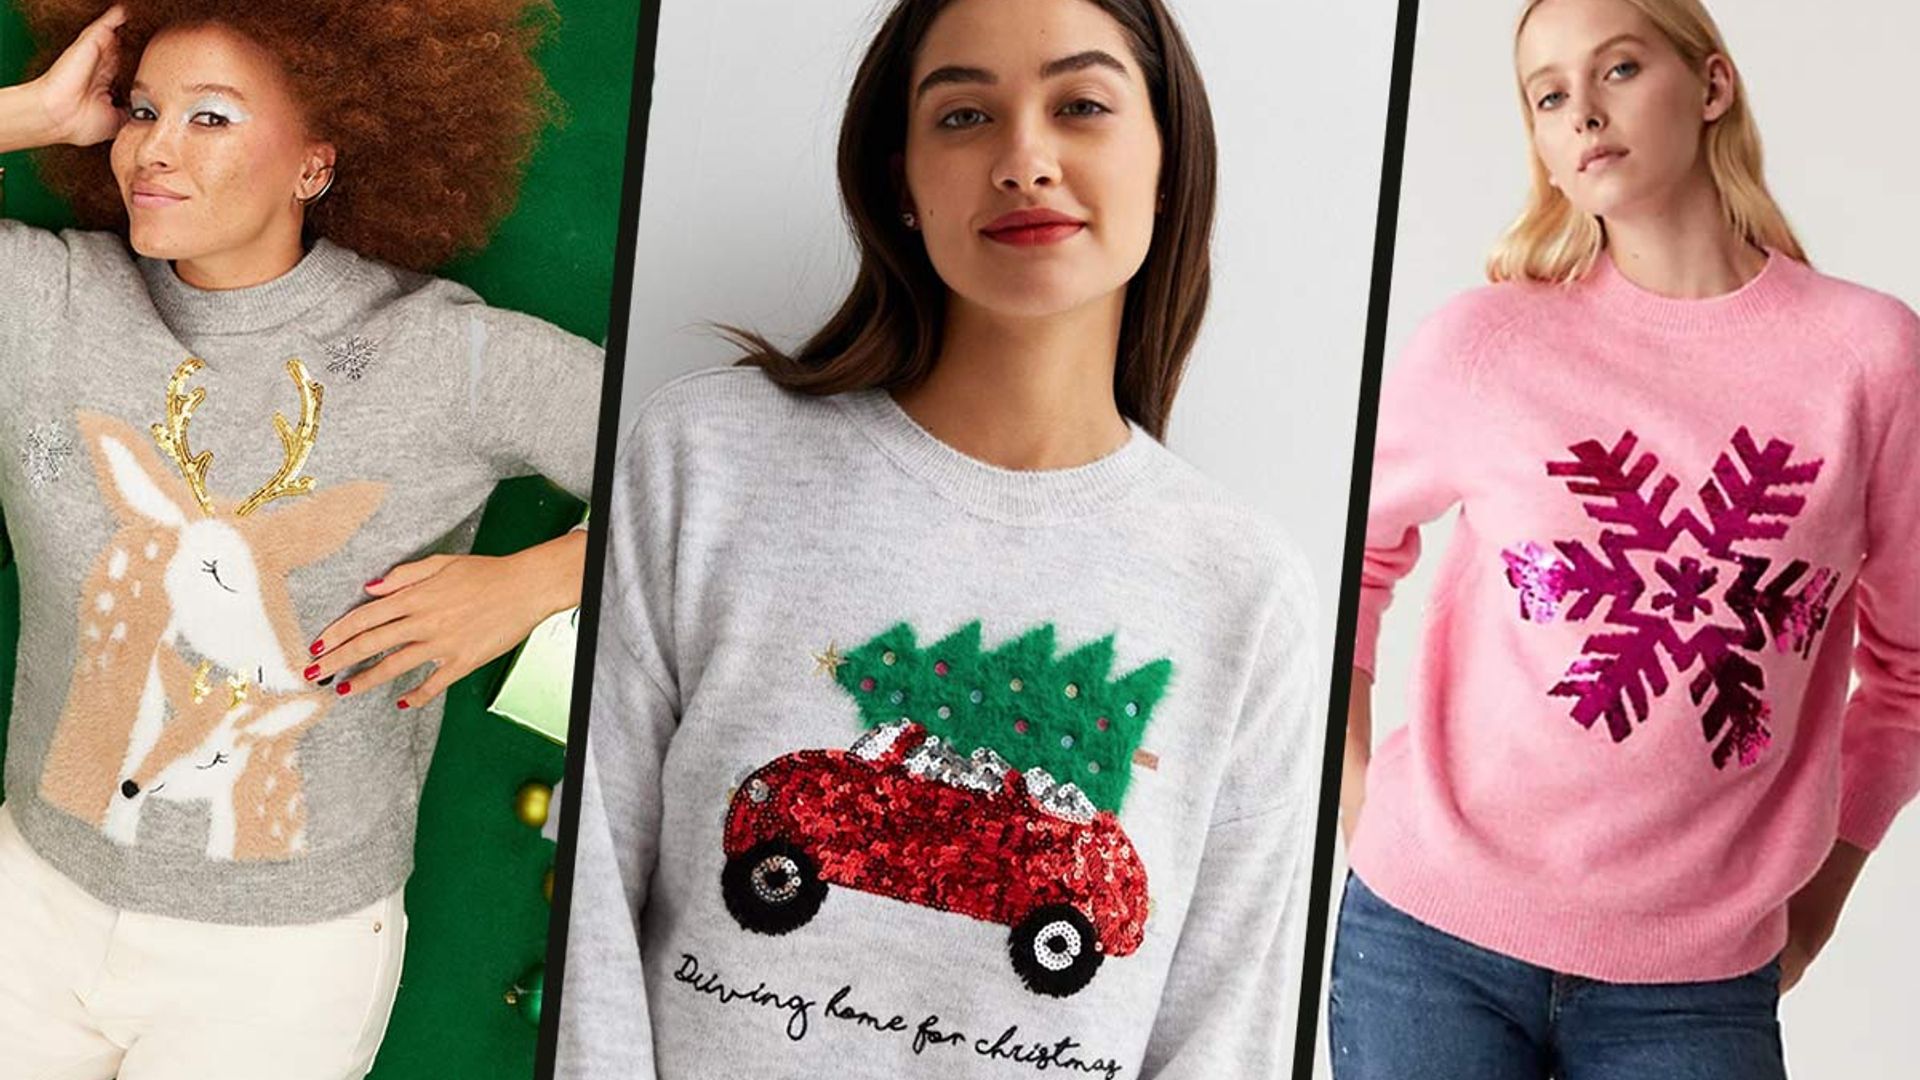 26 of the best Christmas jumpers you'll find this year - trust us!